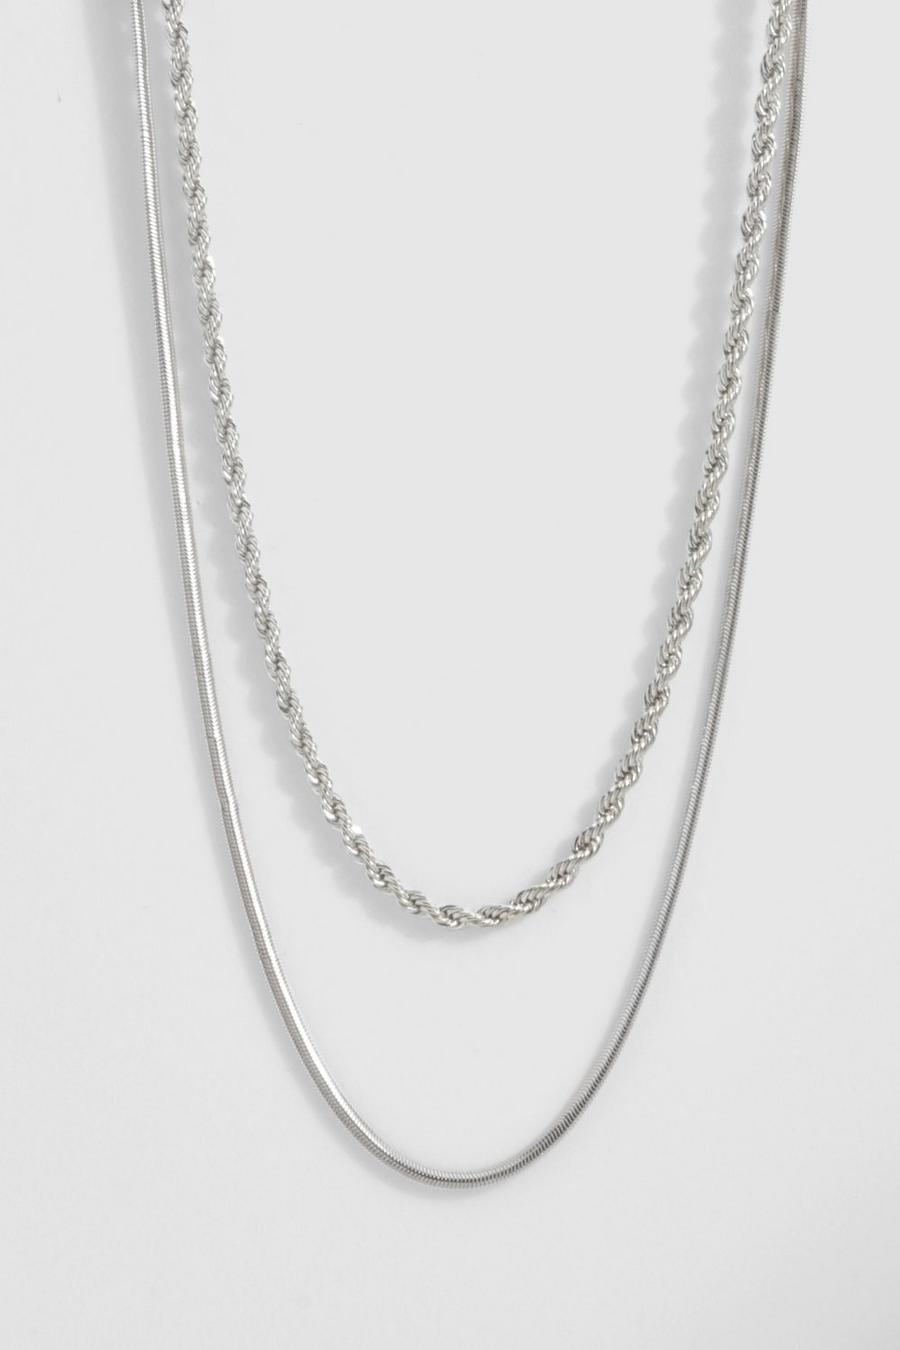 Silver Double Chain Rope Necklace